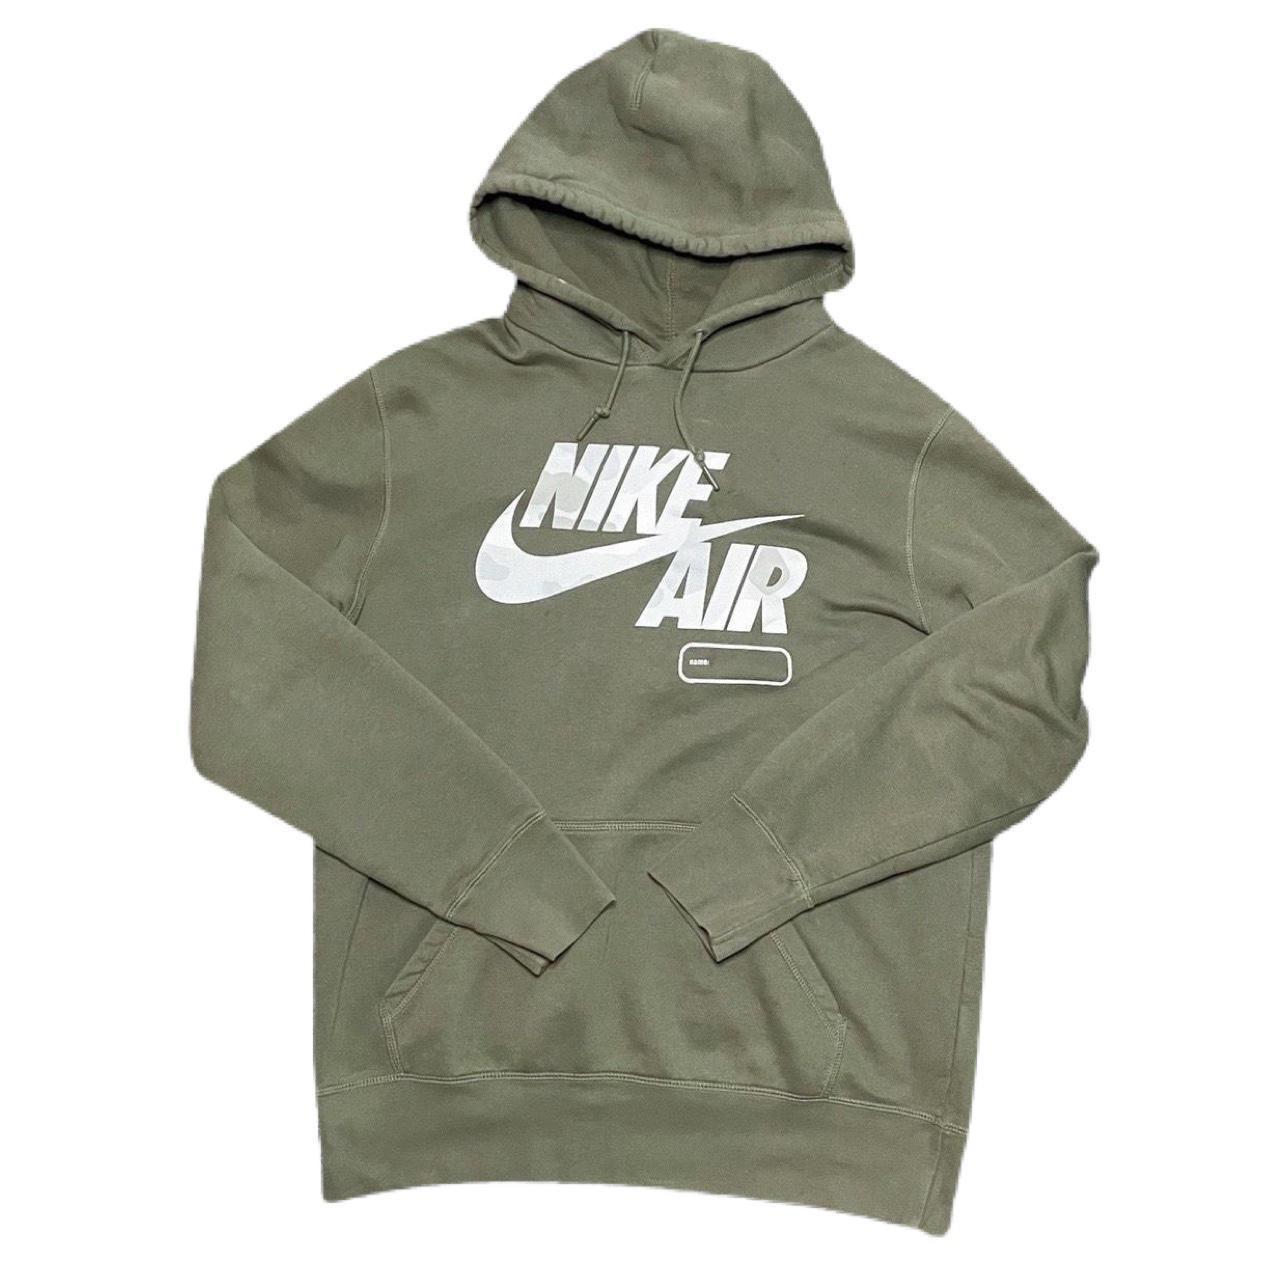 Product Image 1 - Nike Hoodie

- Adult L
- Great